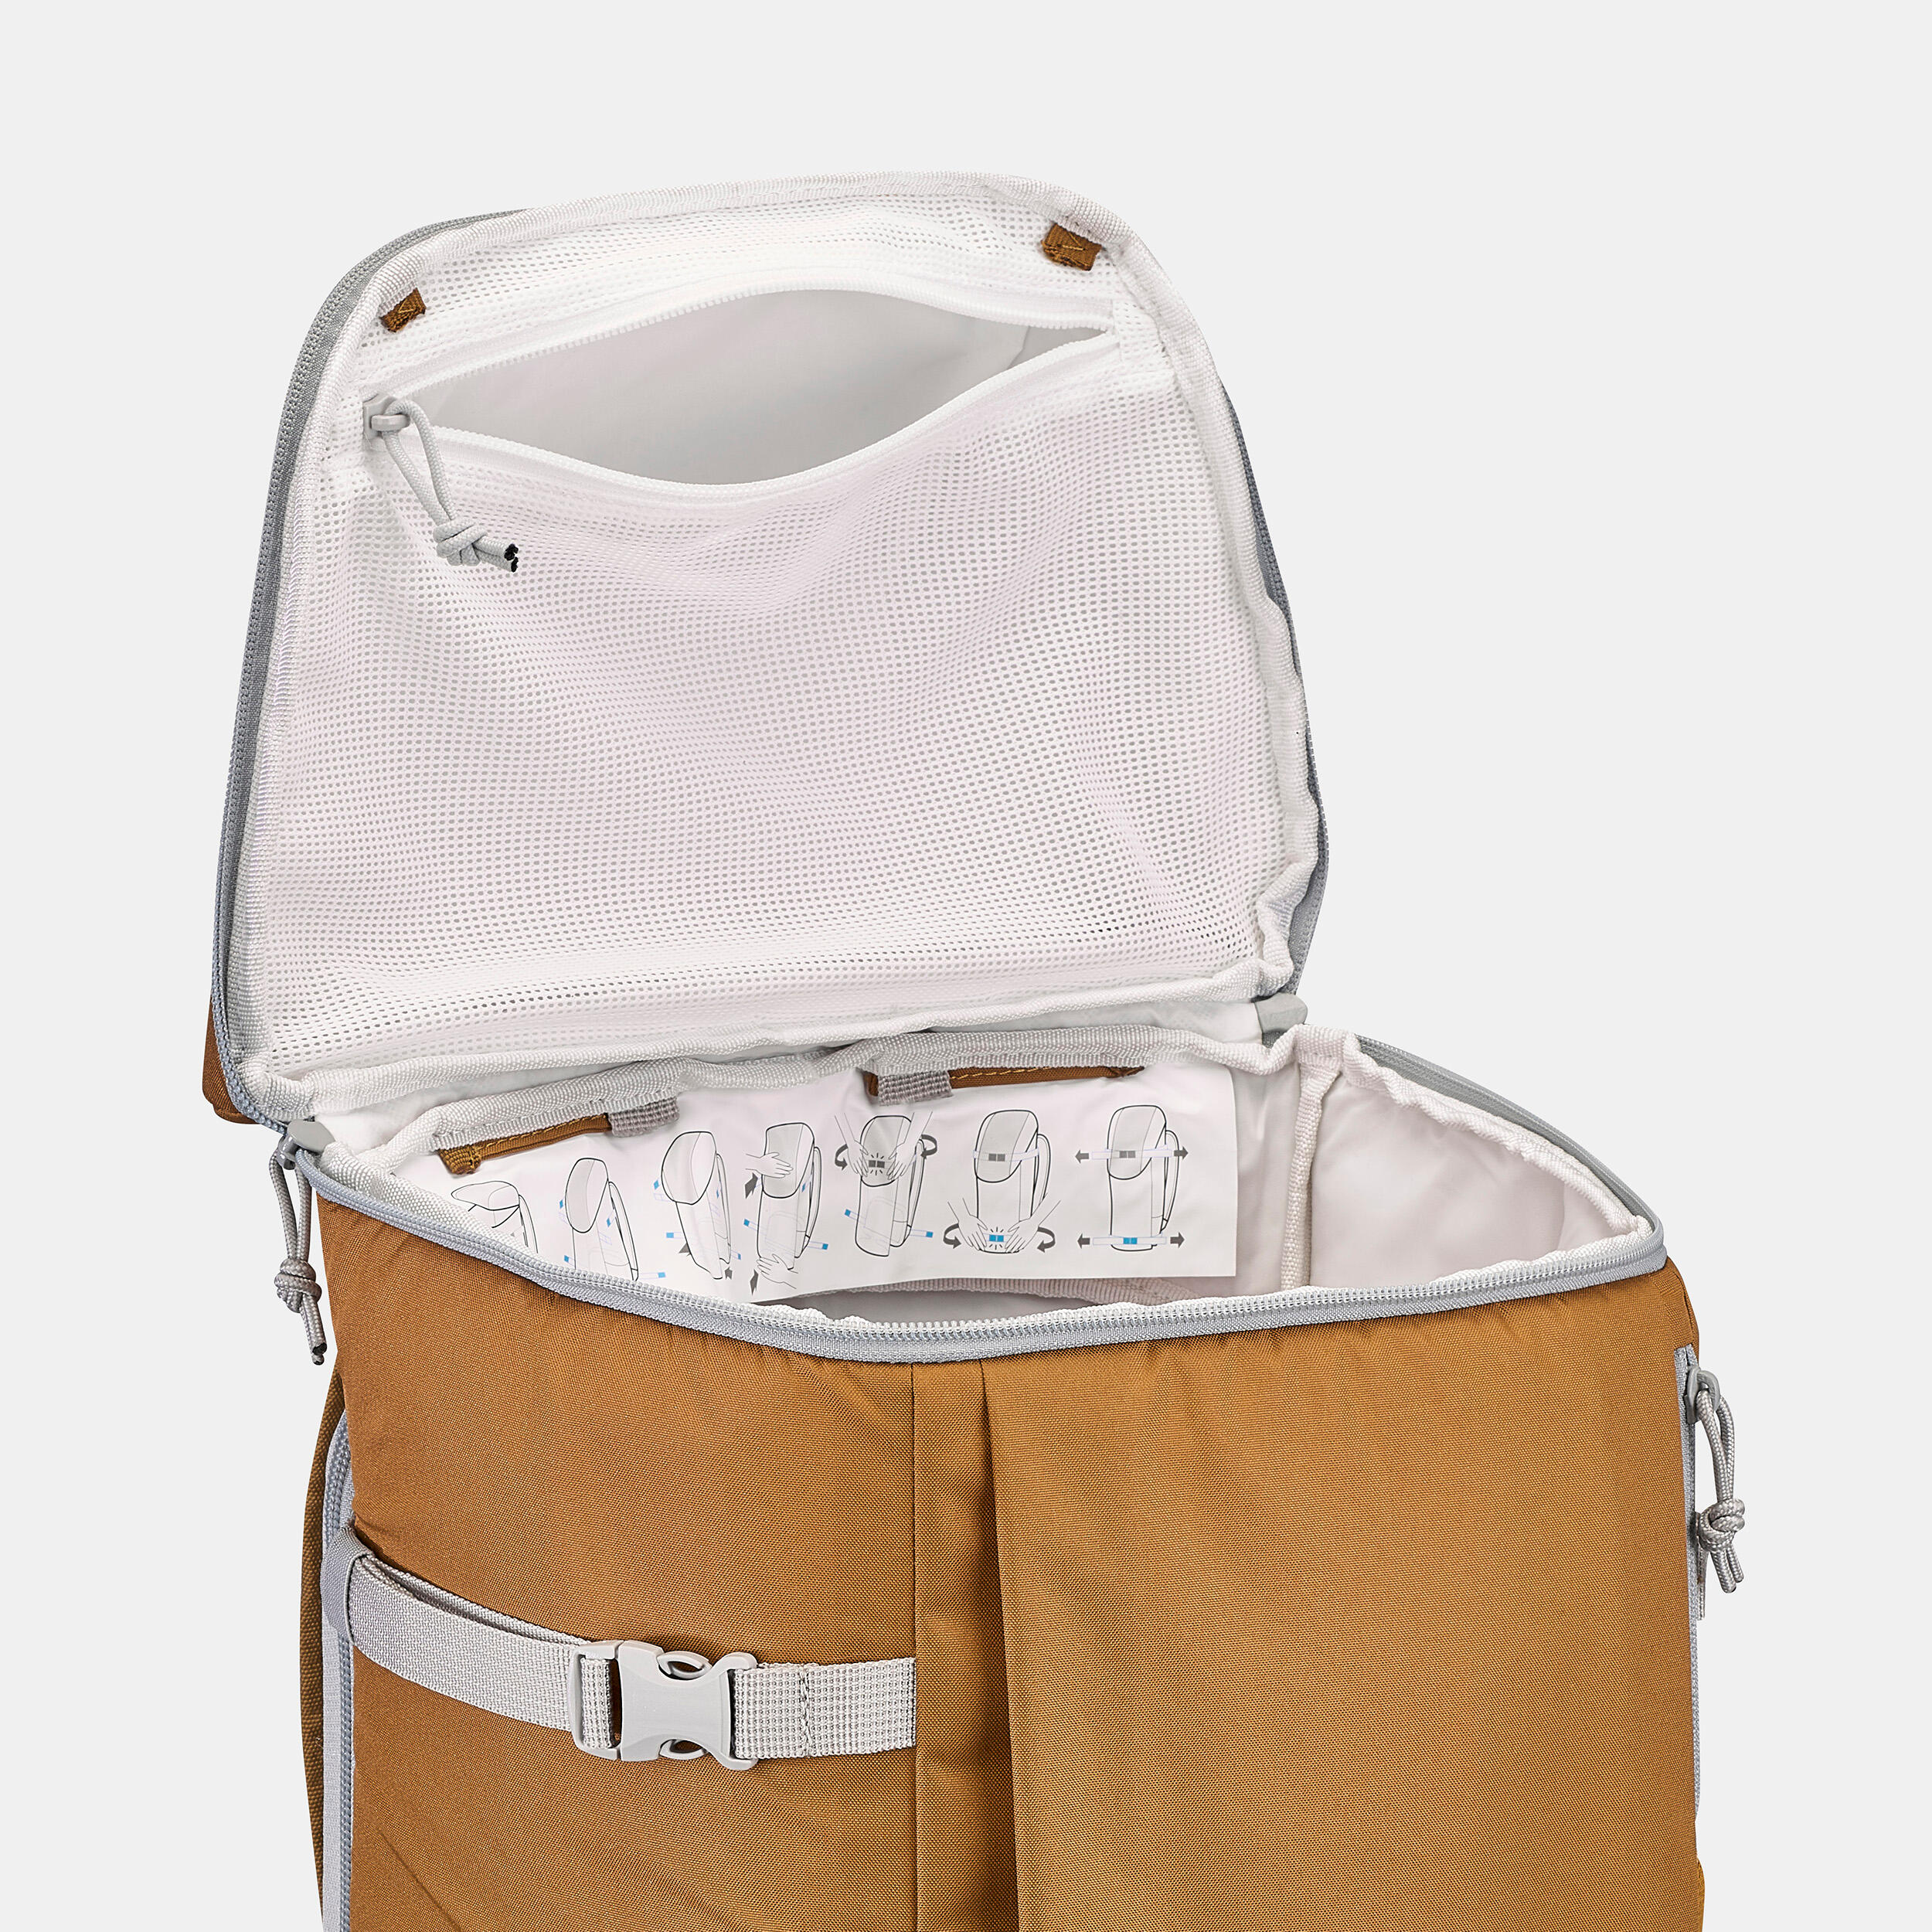 Sac isotherme 30/50/60 canettes pliable et isotherme grand sac à